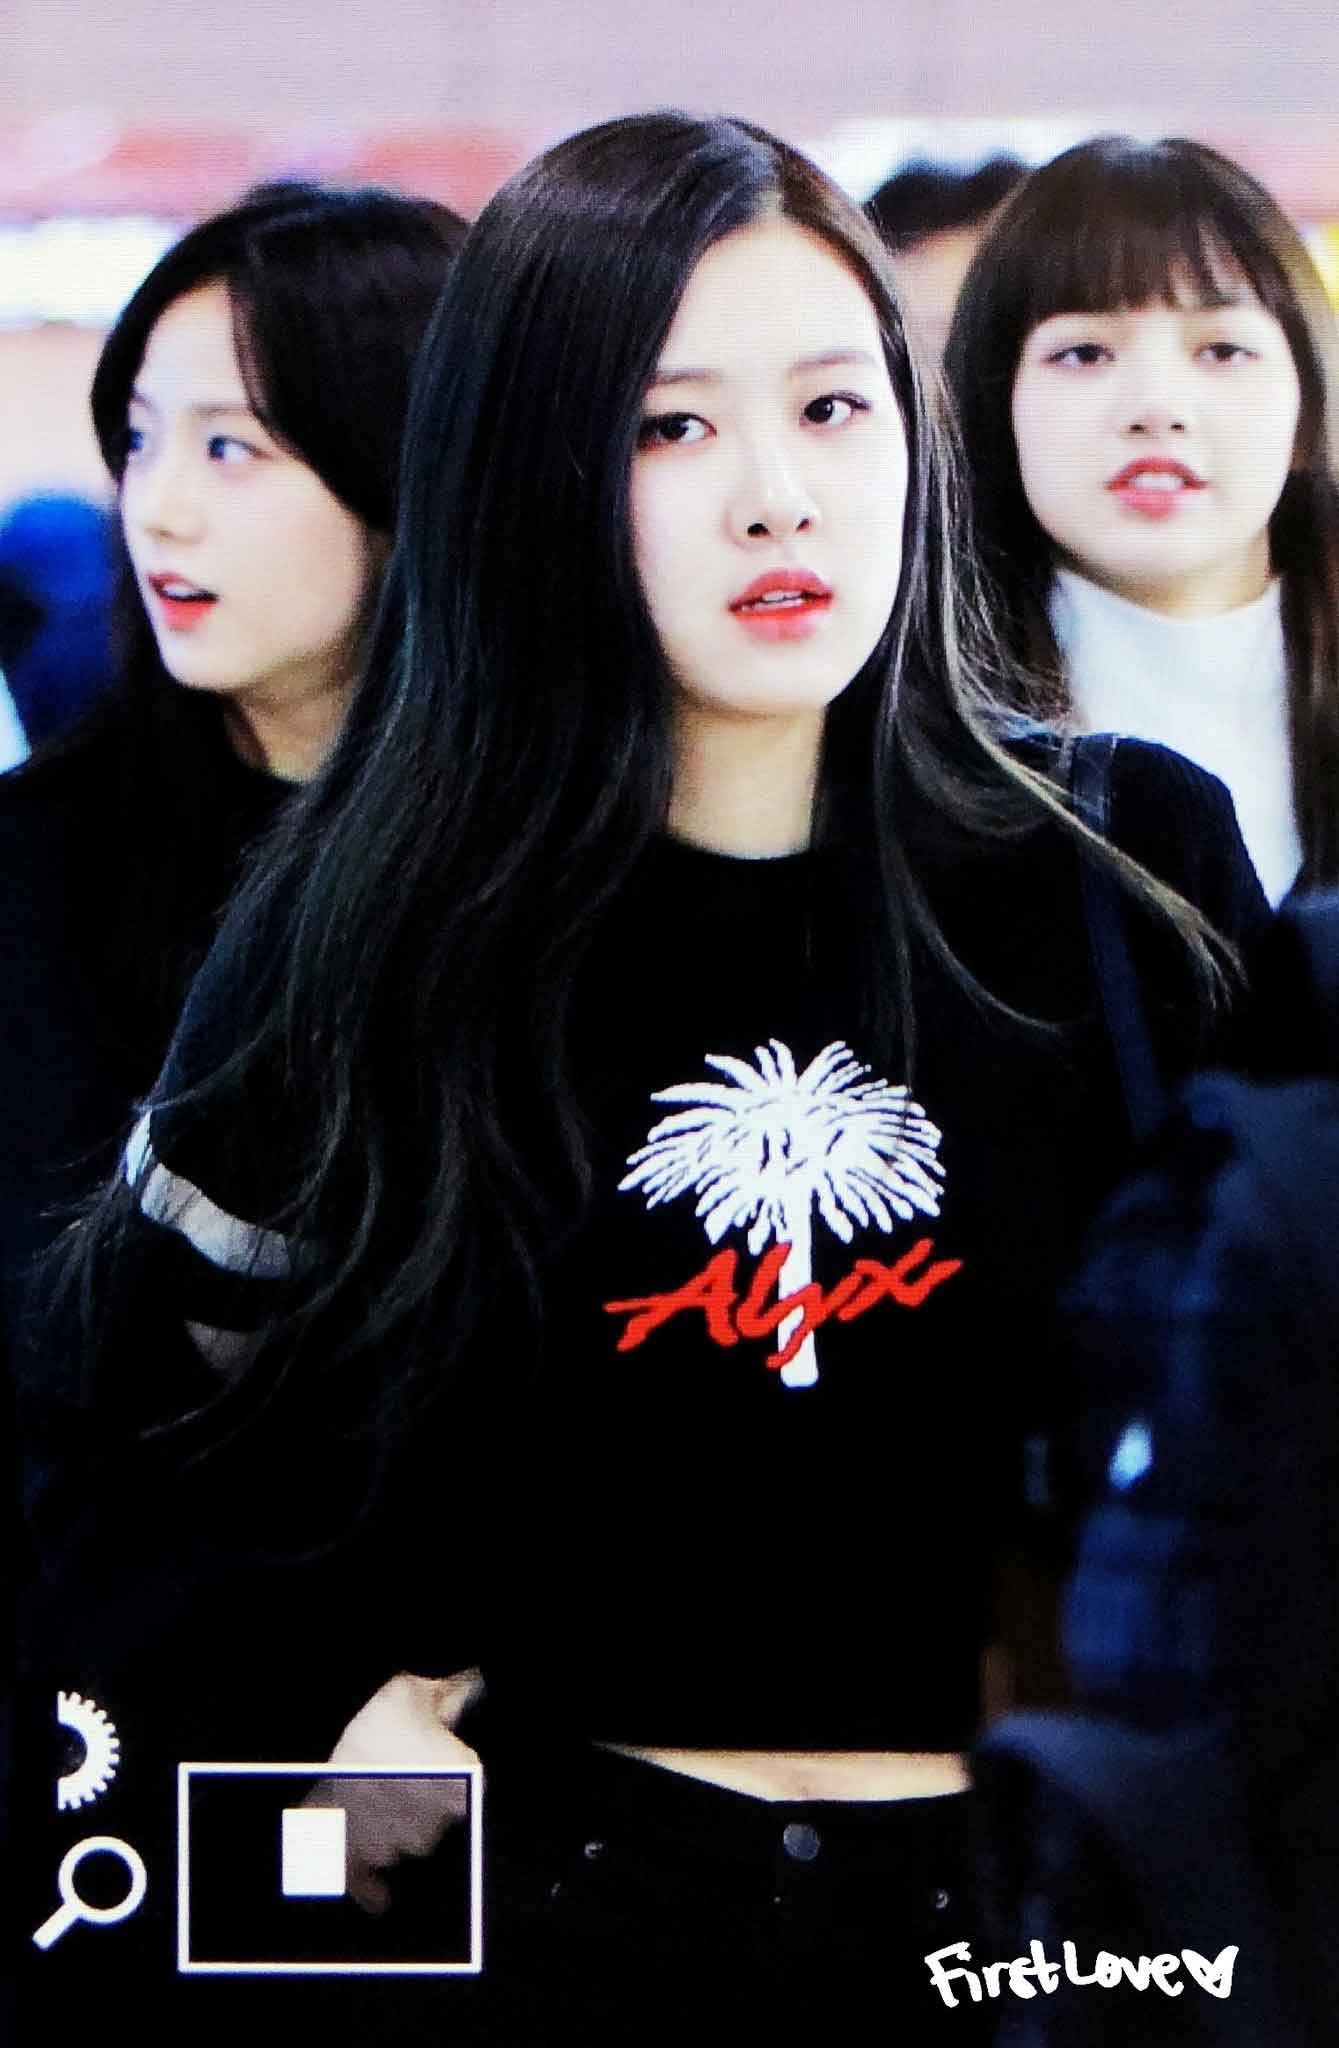 Blackpink Rose Airport Fashion Back from Jeju Island 26 March 2018